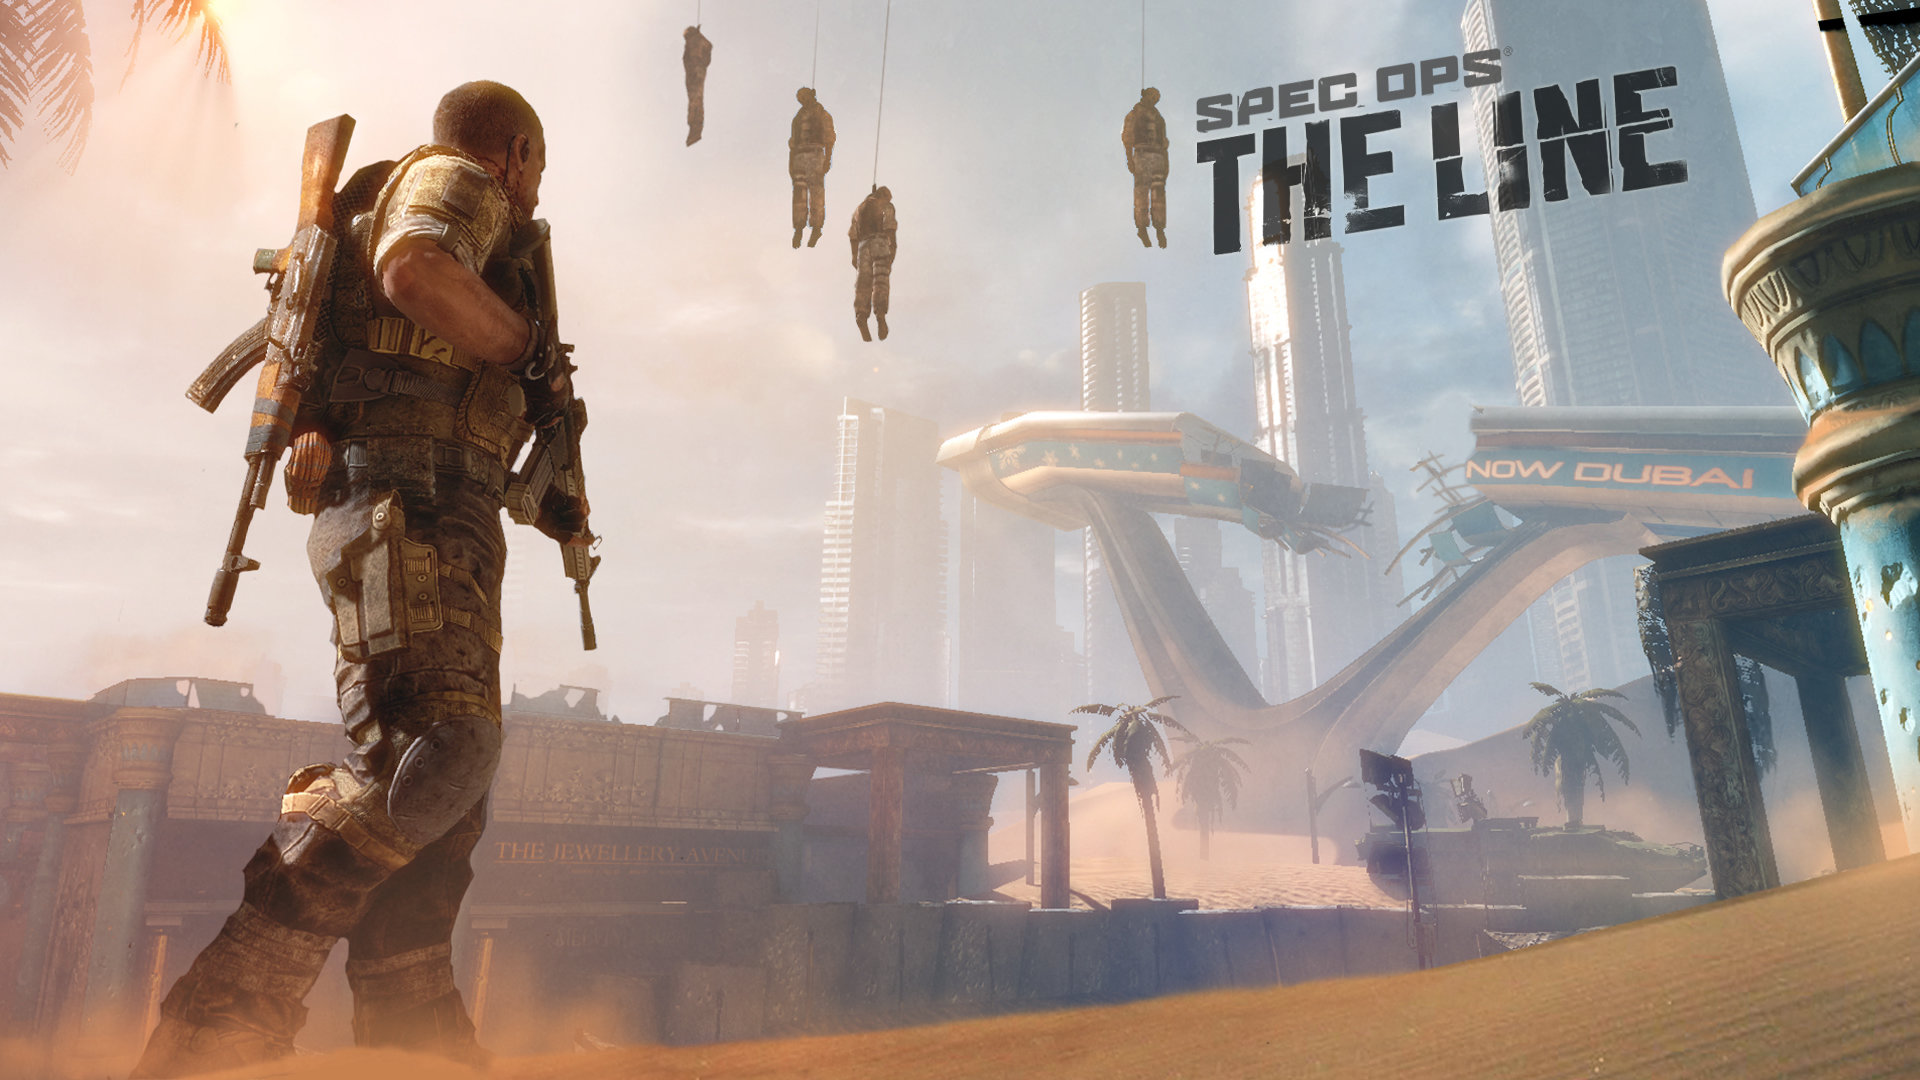 Awesome Spec Ops: The Line free wallpaper ID:72346 for full hd desktop